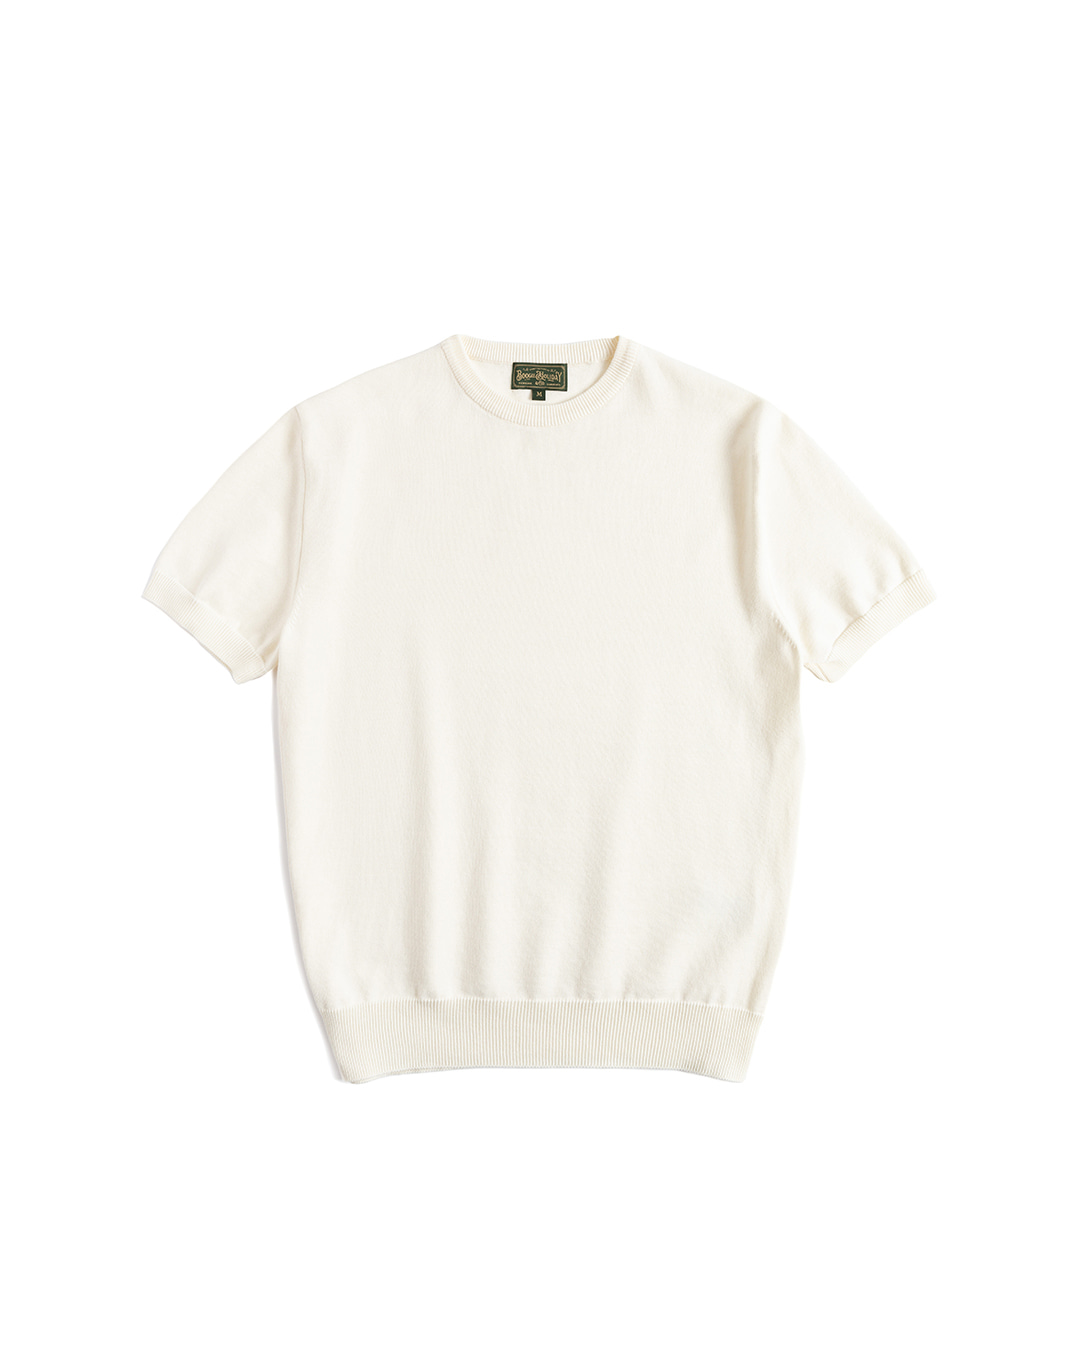 09 ESSENTIAL KNITTED T-SHIRT (cream)